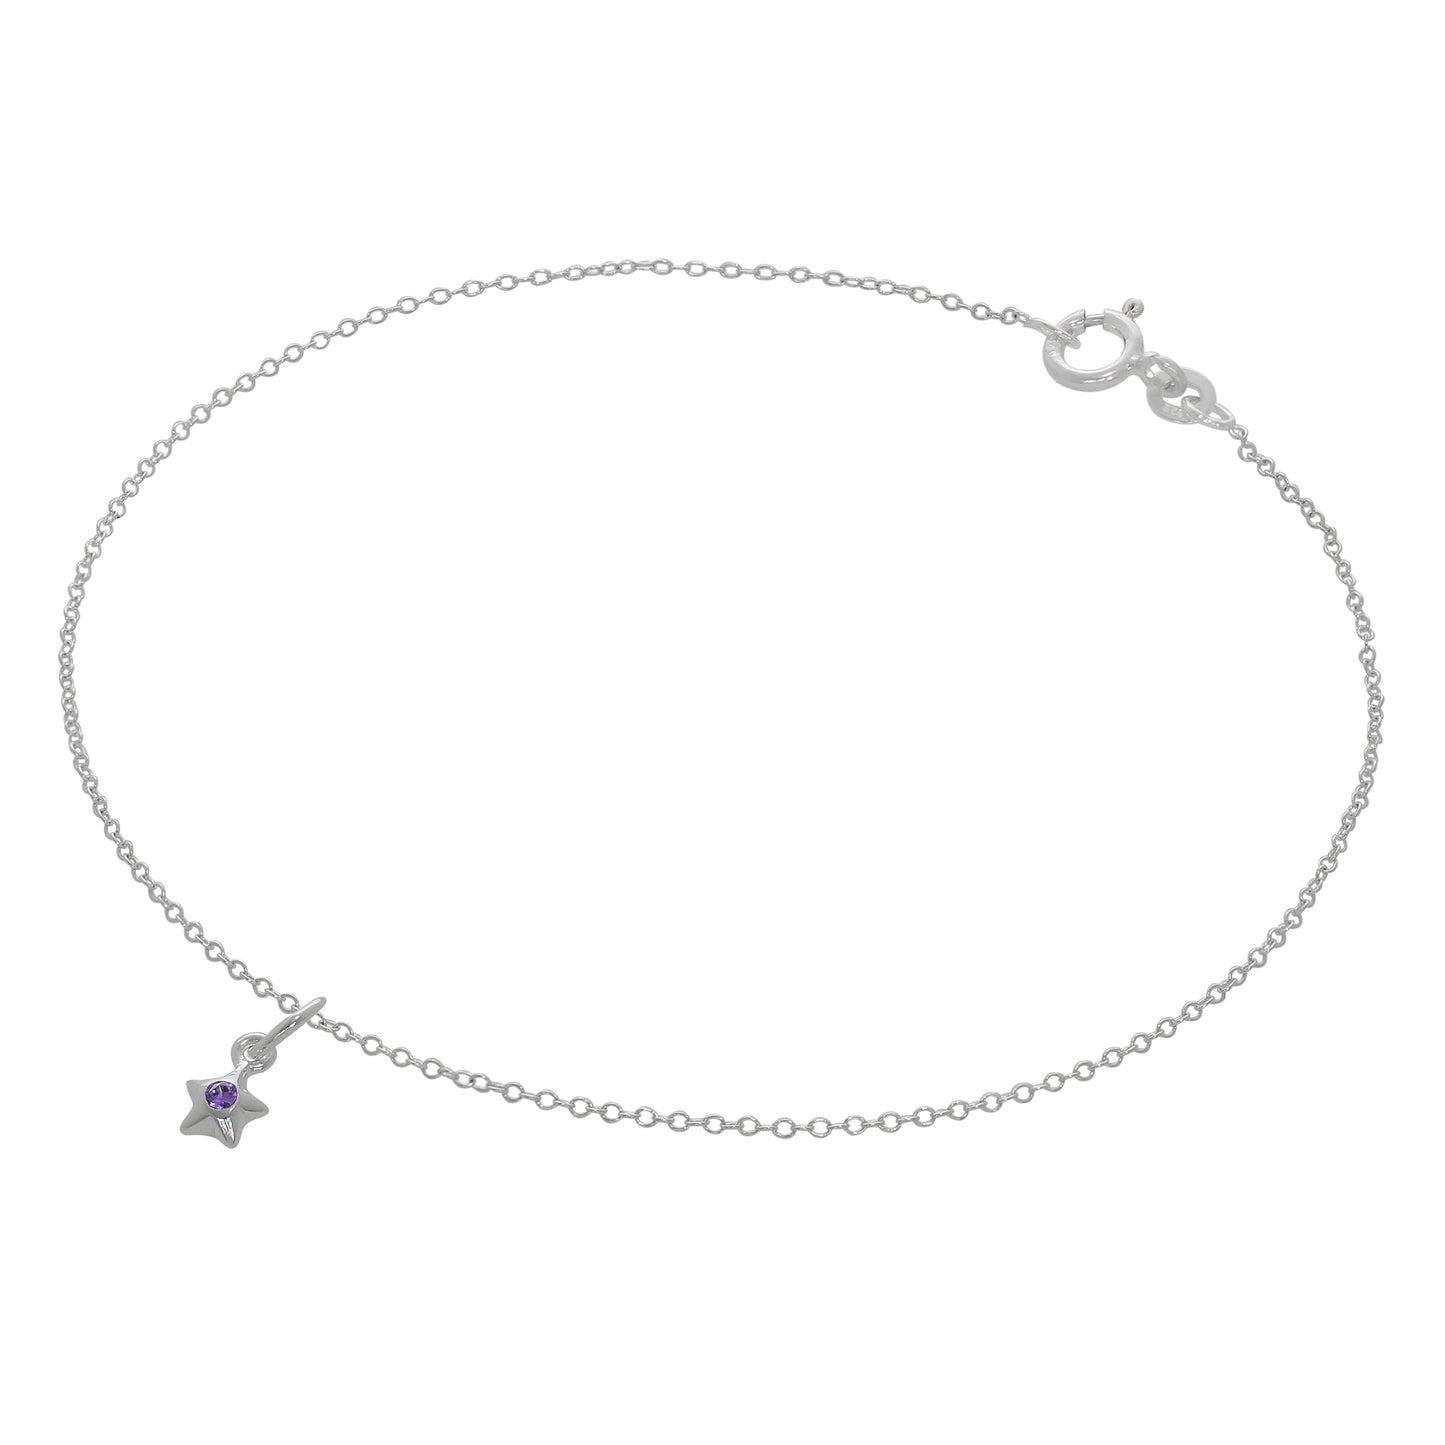 Fine Sterling Silver Belcher Anklet with CZ Crystal Birthstone Star Charm - 10 Inches